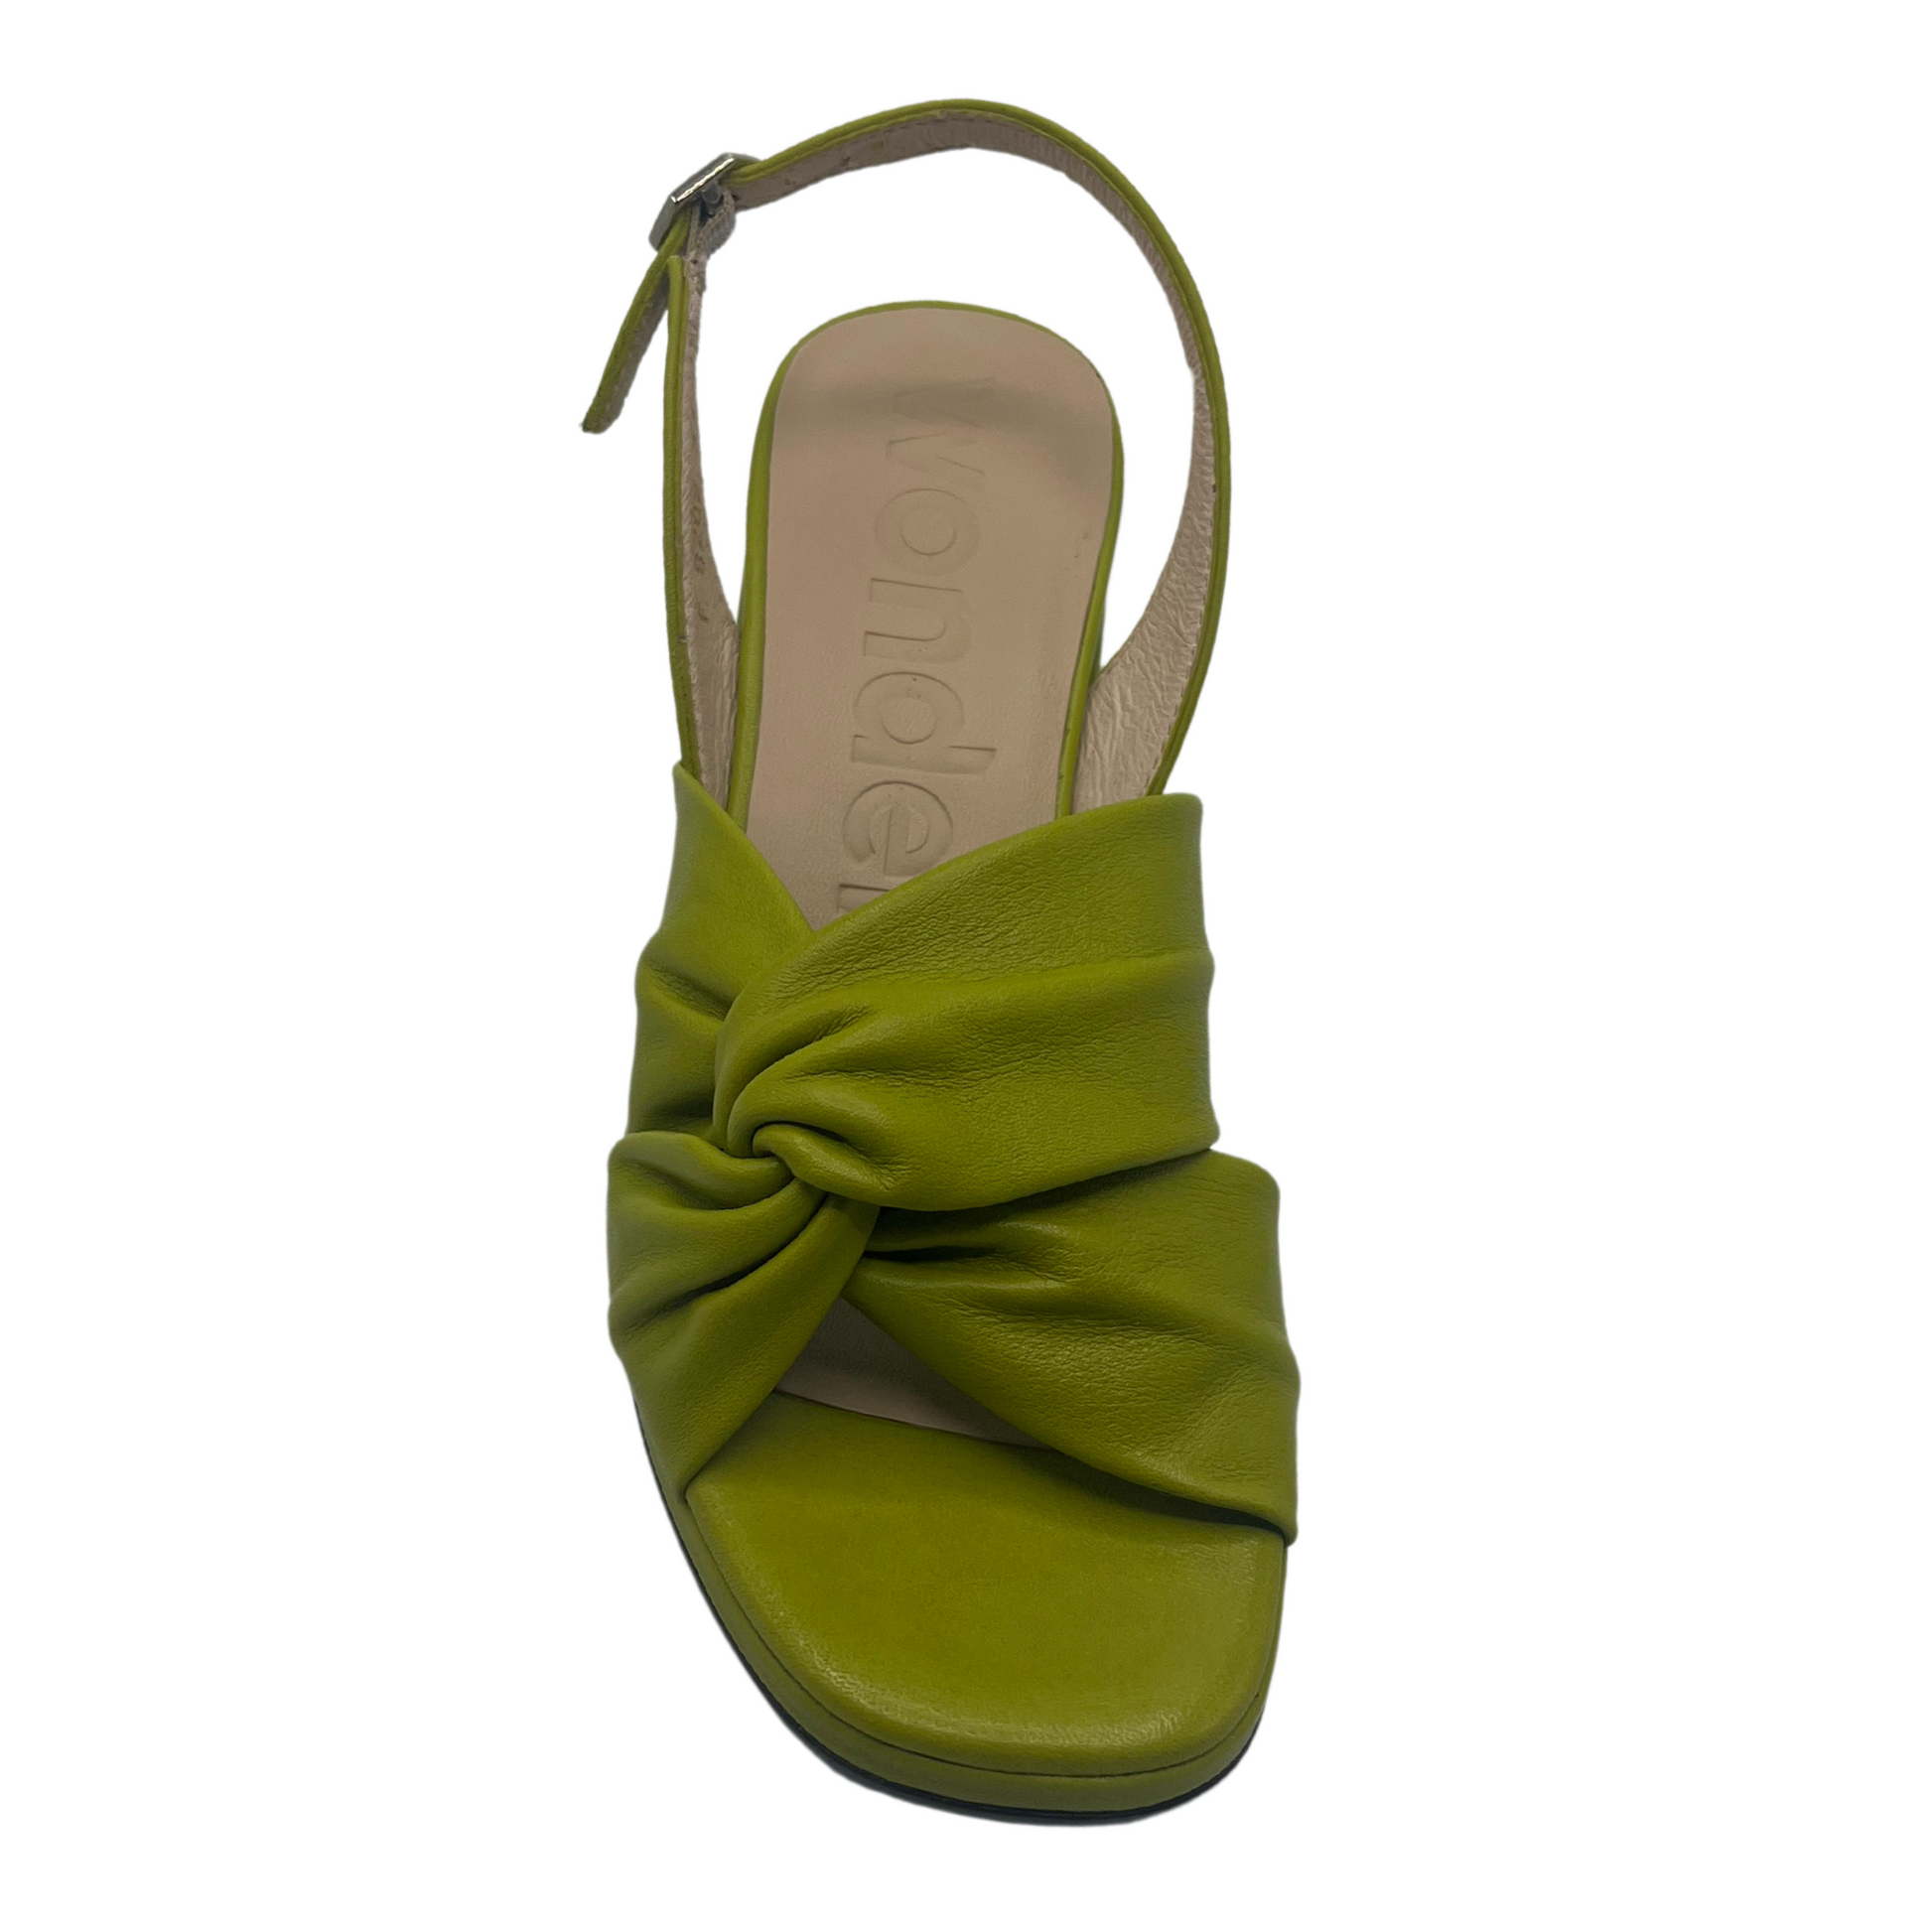 Top view of apple green leather sandal with square toe and buckle strap